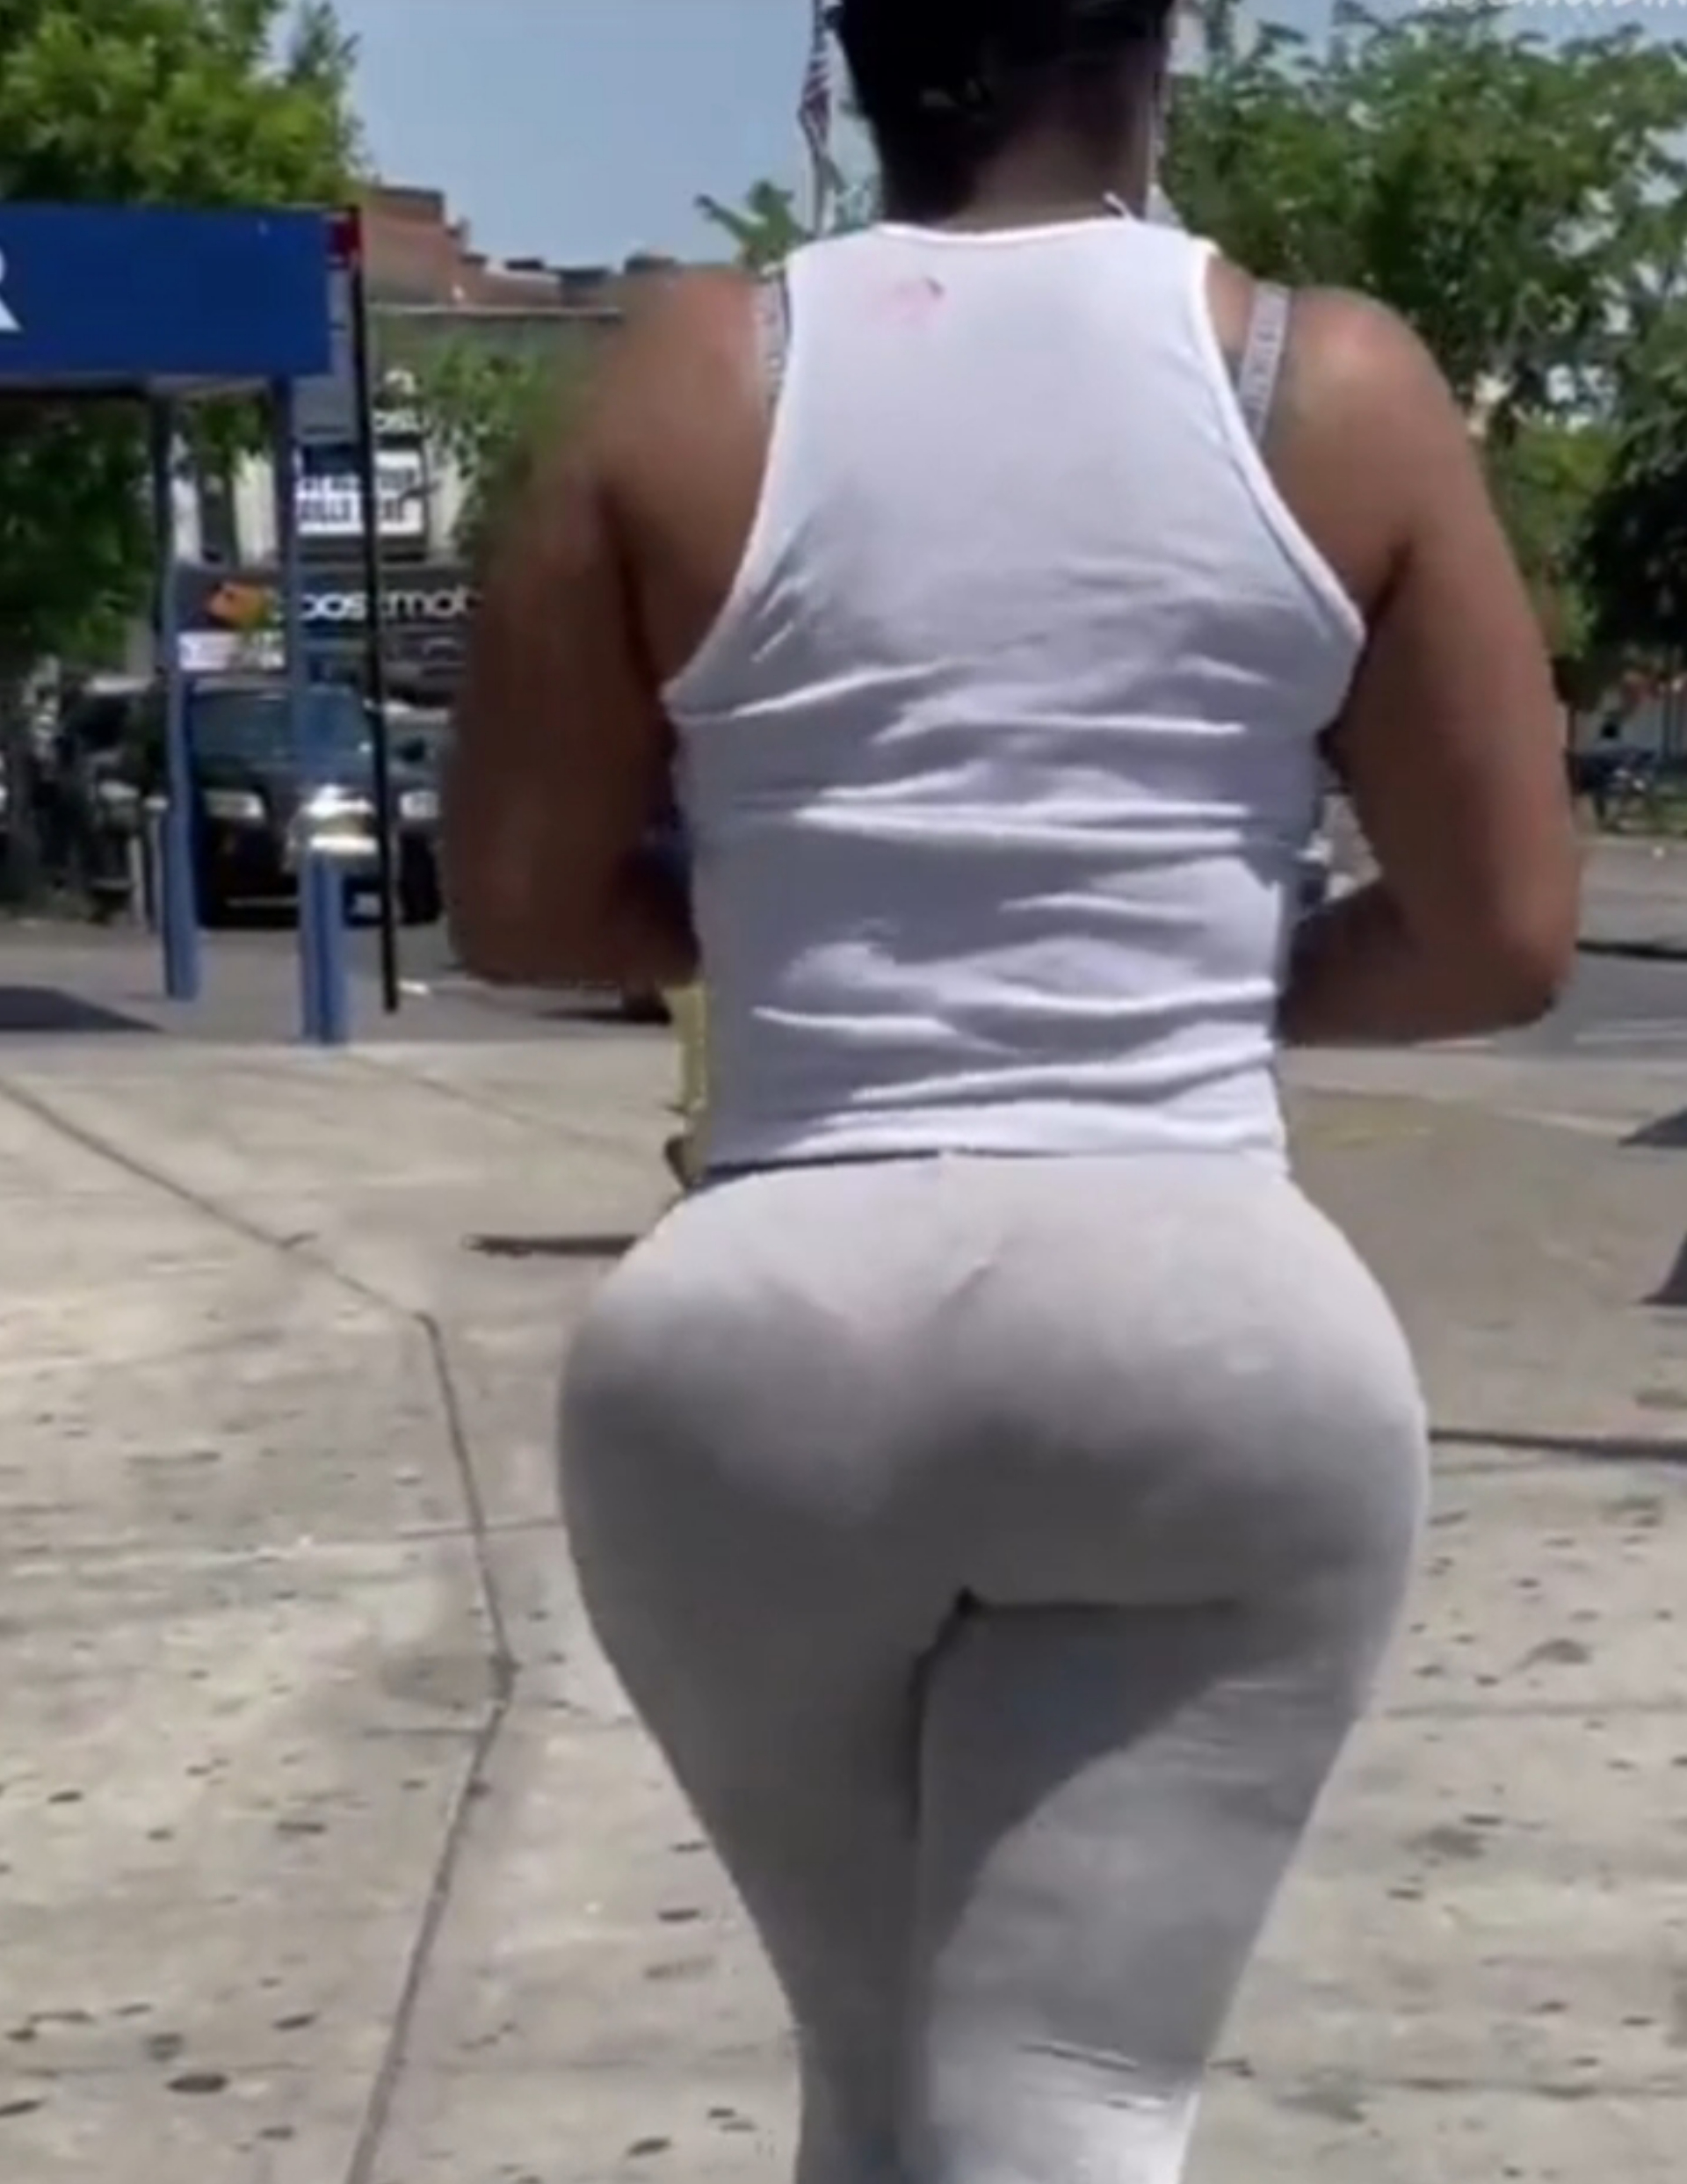 MONSTER BUBBLE BOOTY JIGGLY ASS CANDID